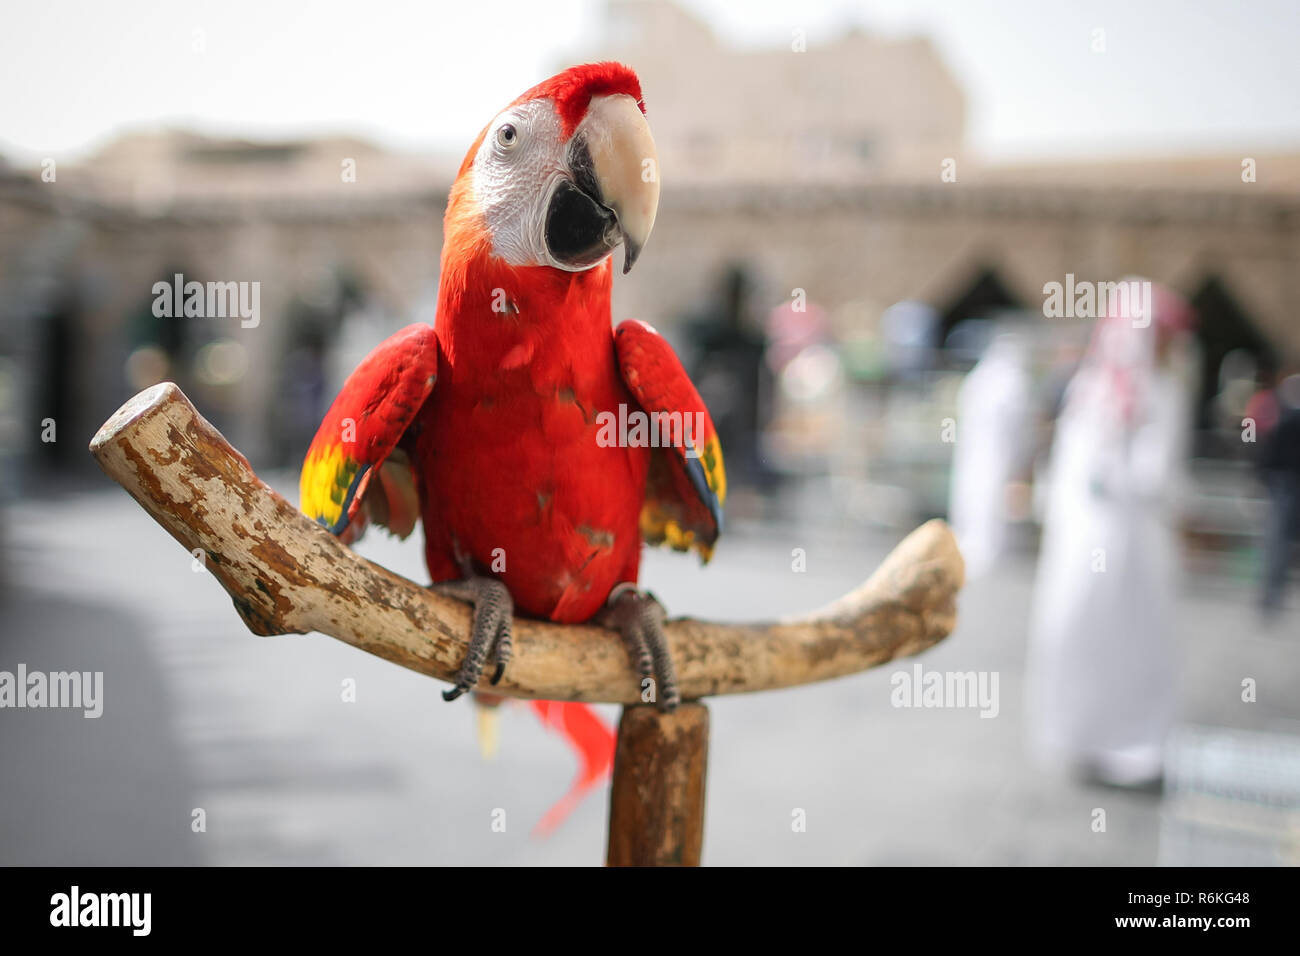 Close-up red Ara parrot on wooden perch. Cute scene the huge scarlet macaw  sitting on the branch. Behavior of wild bird in captivity. Undomesticated  animal among contemporary urban environment Stock Photo -